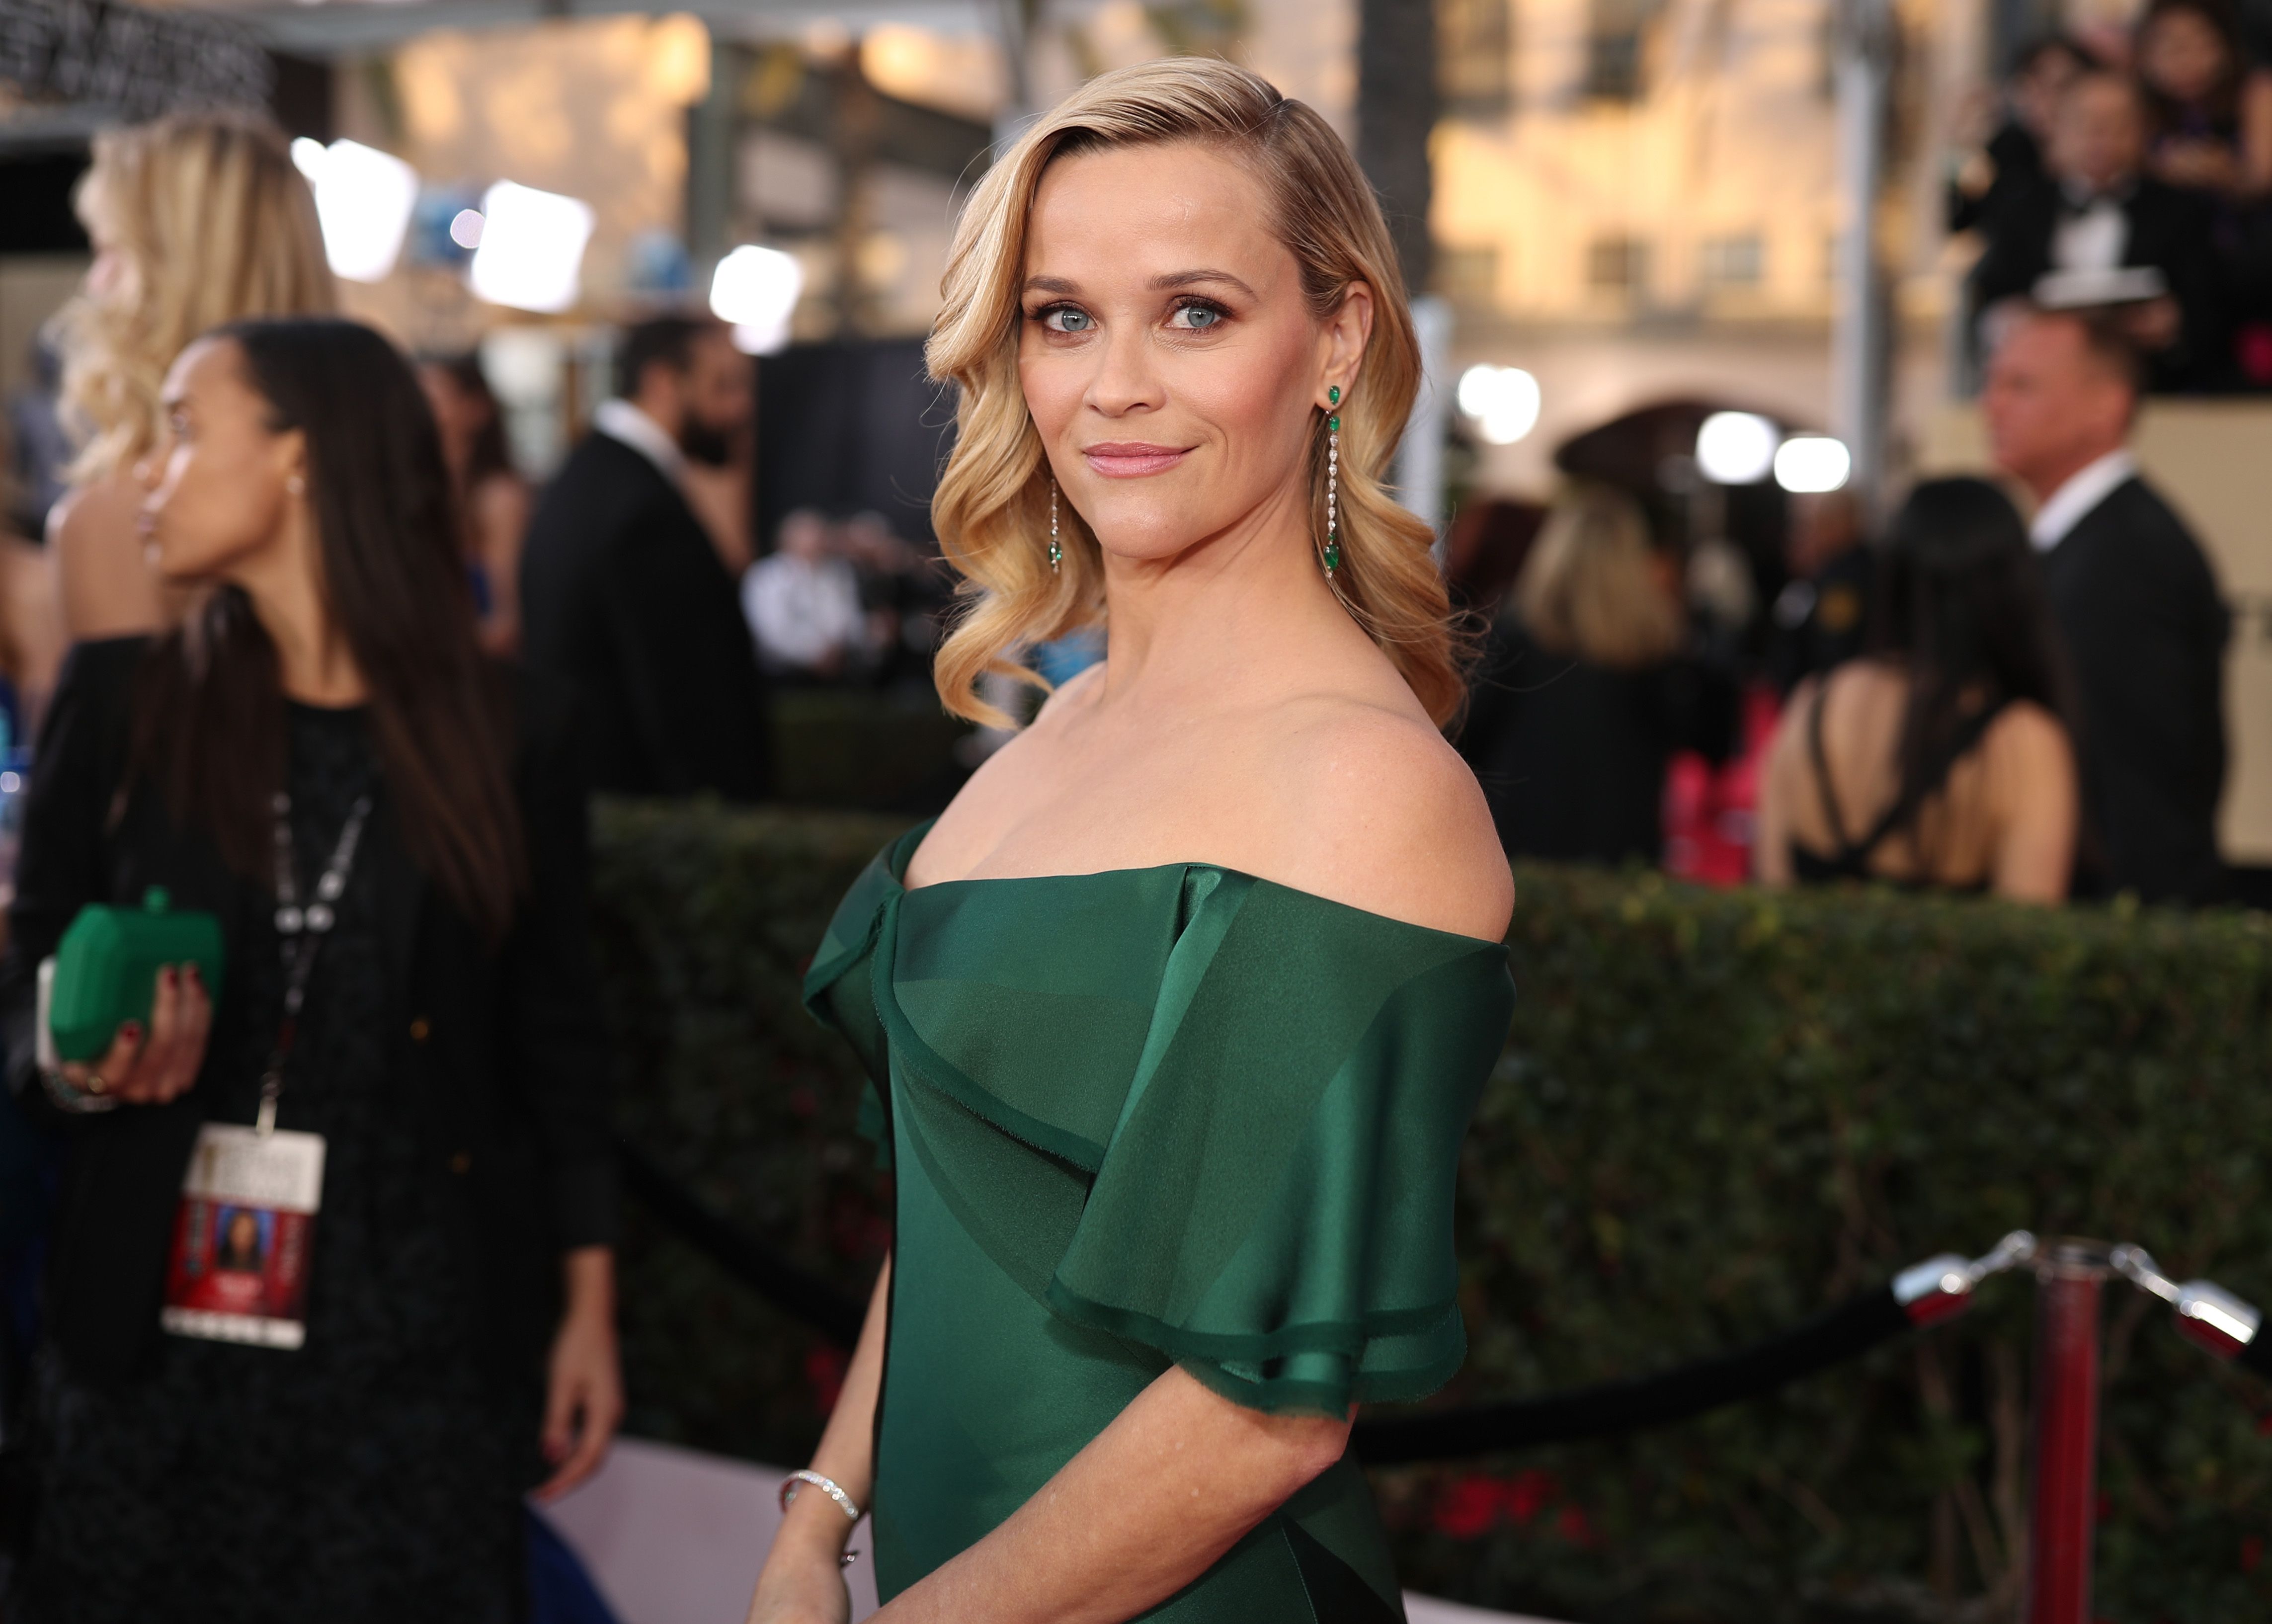 Reese Witherspoon at the 24th Annual Screen Actors Guild Awards at The Shrine Auditorium on January 21, 2018 | Photo: Getty Images